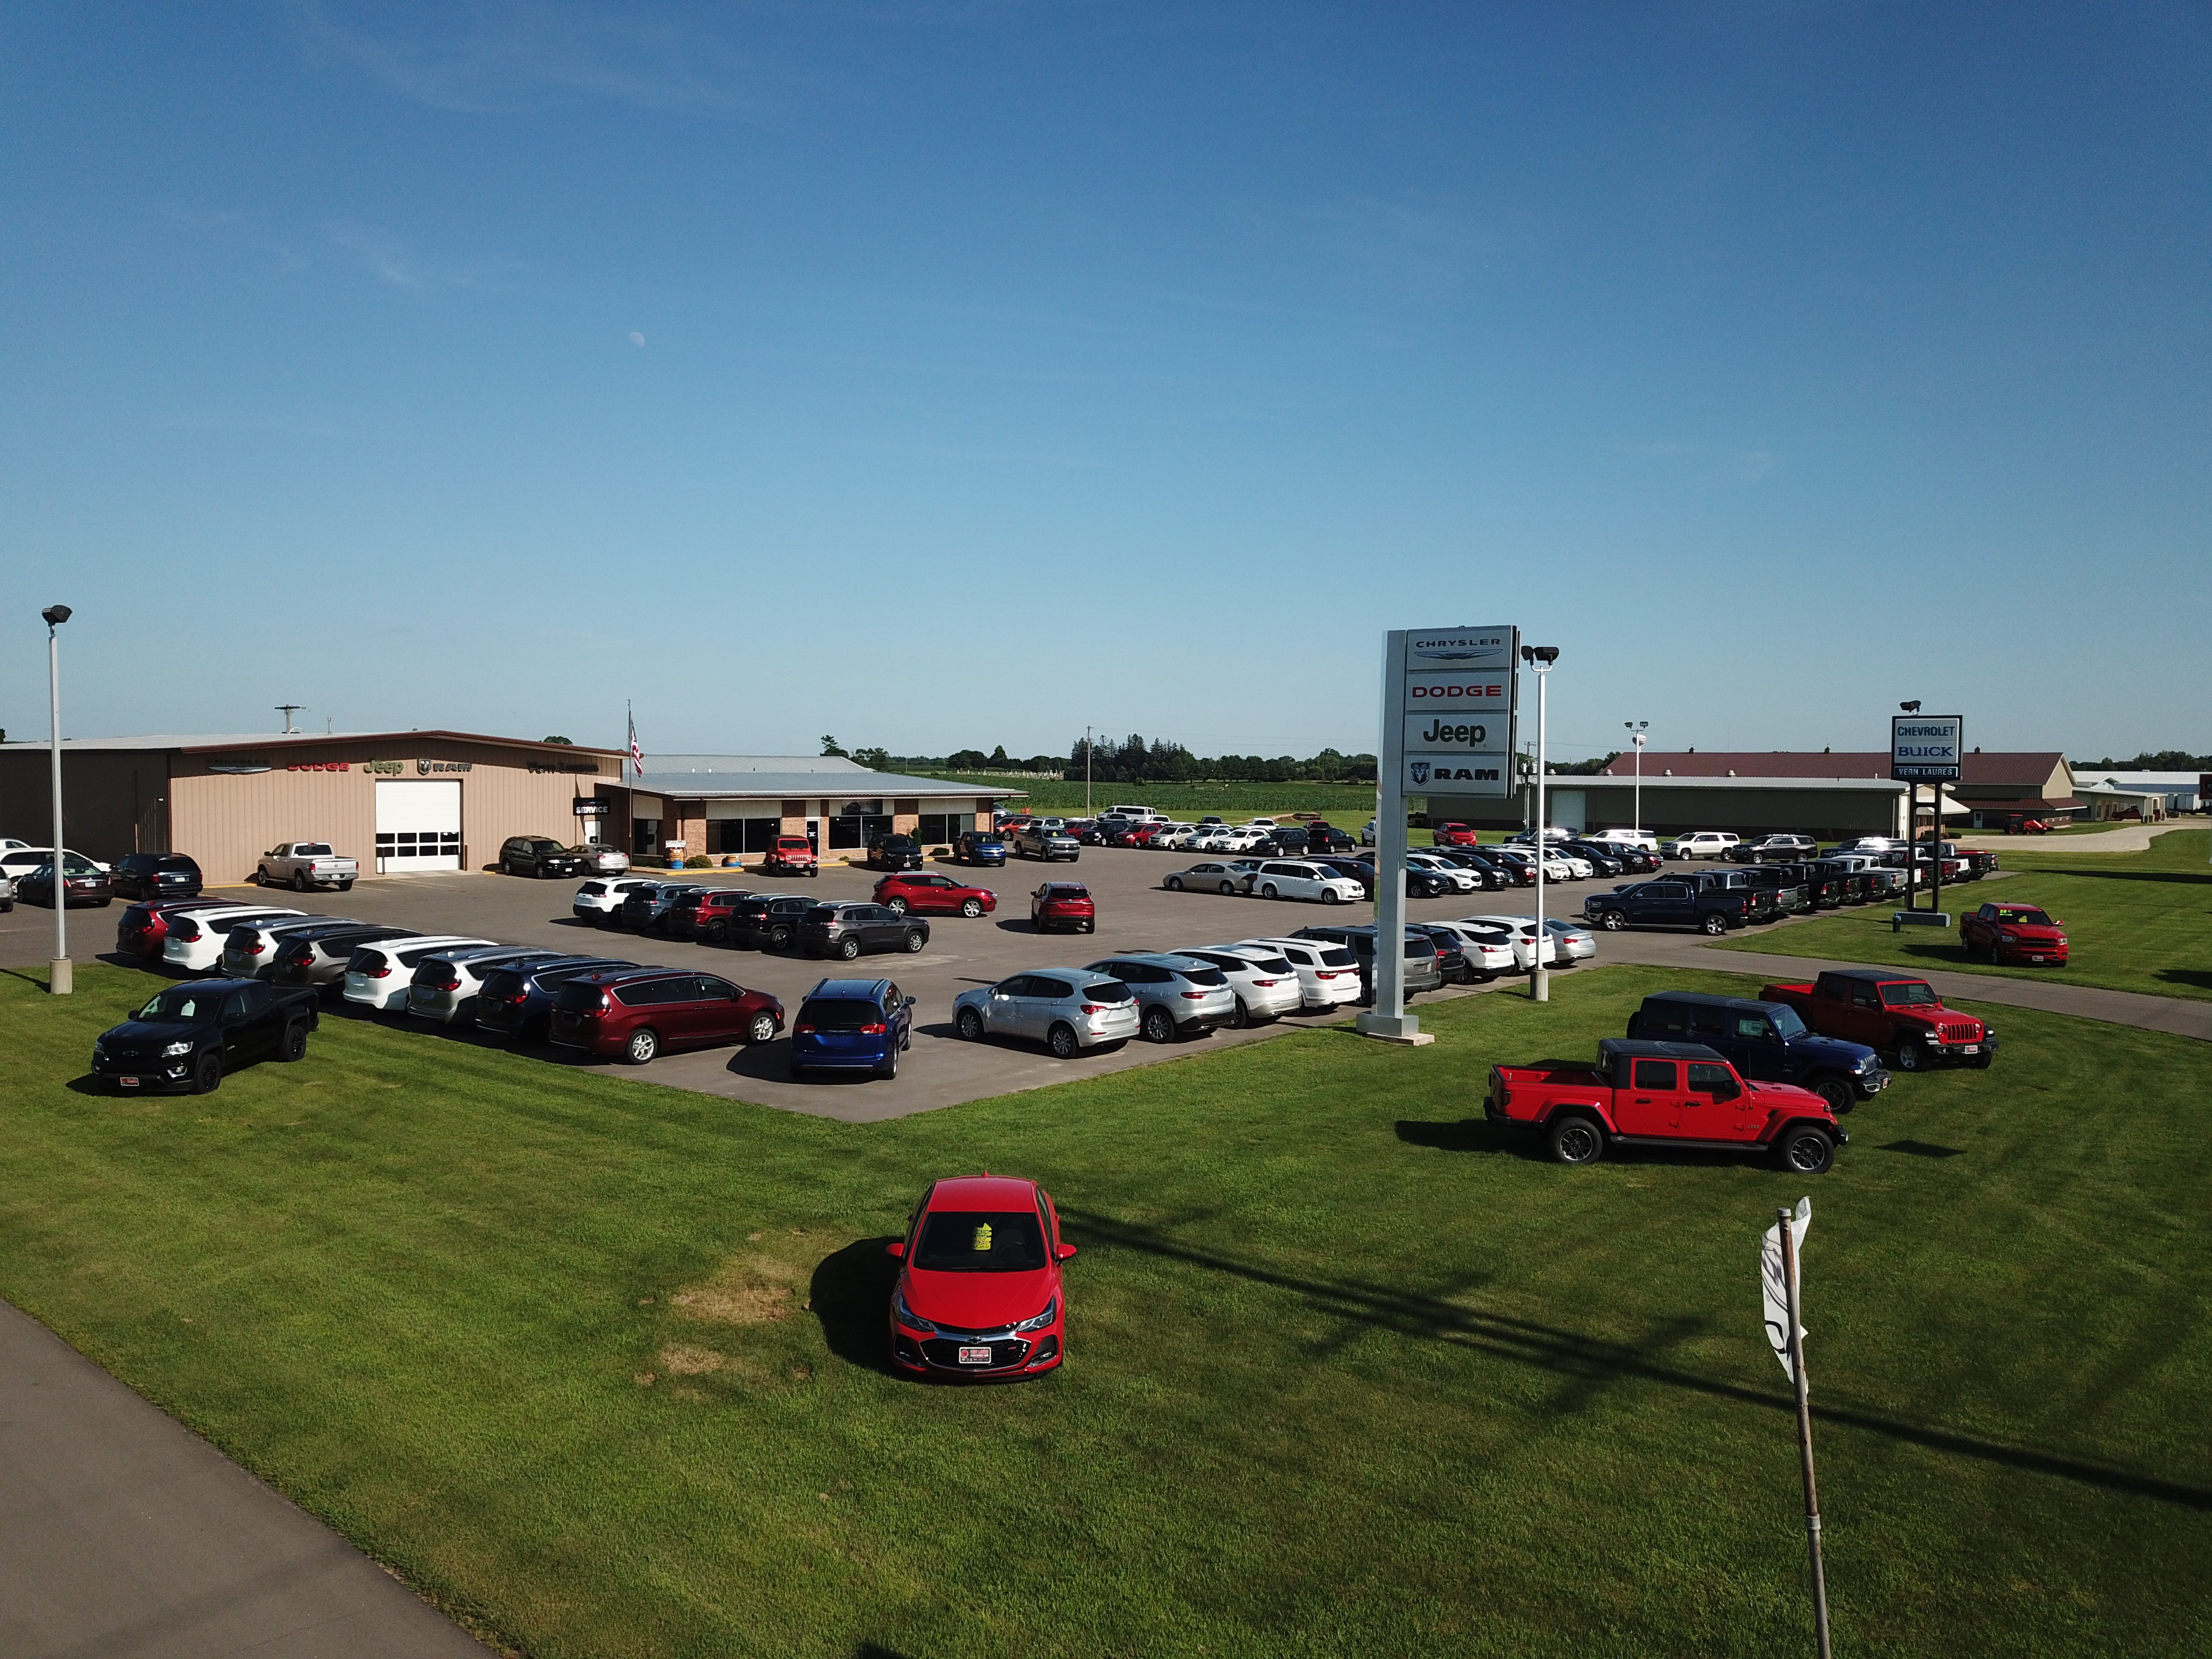 Overview of dealership lot